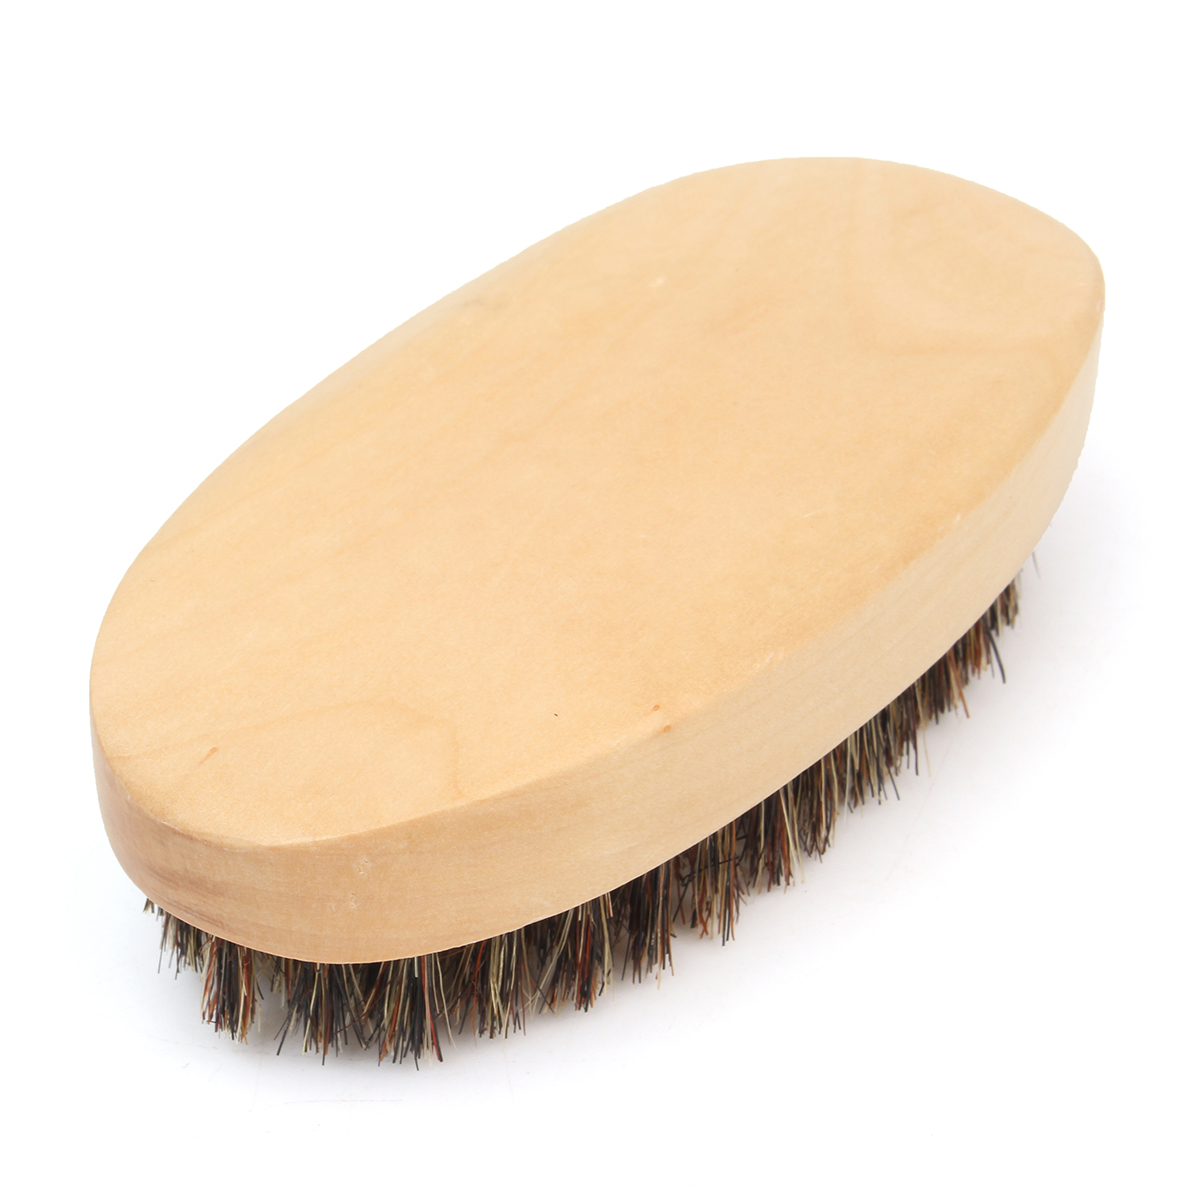 Wood Handle Boar Bristle Beard Taming Mustache Brush Smooth Style Hair Comb